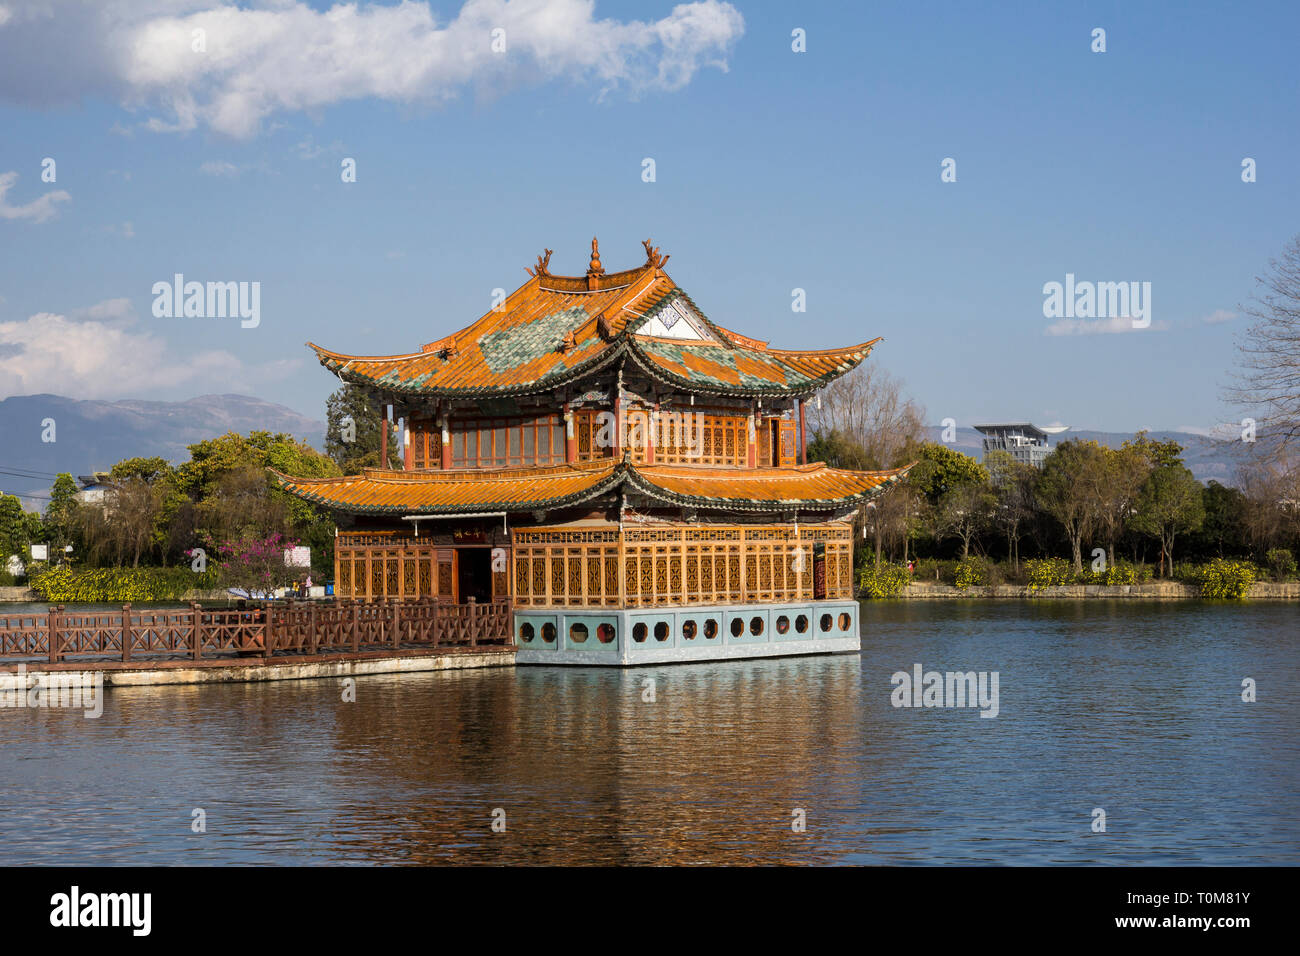 Traditional Chinese pavilion on a lake Stock Photo